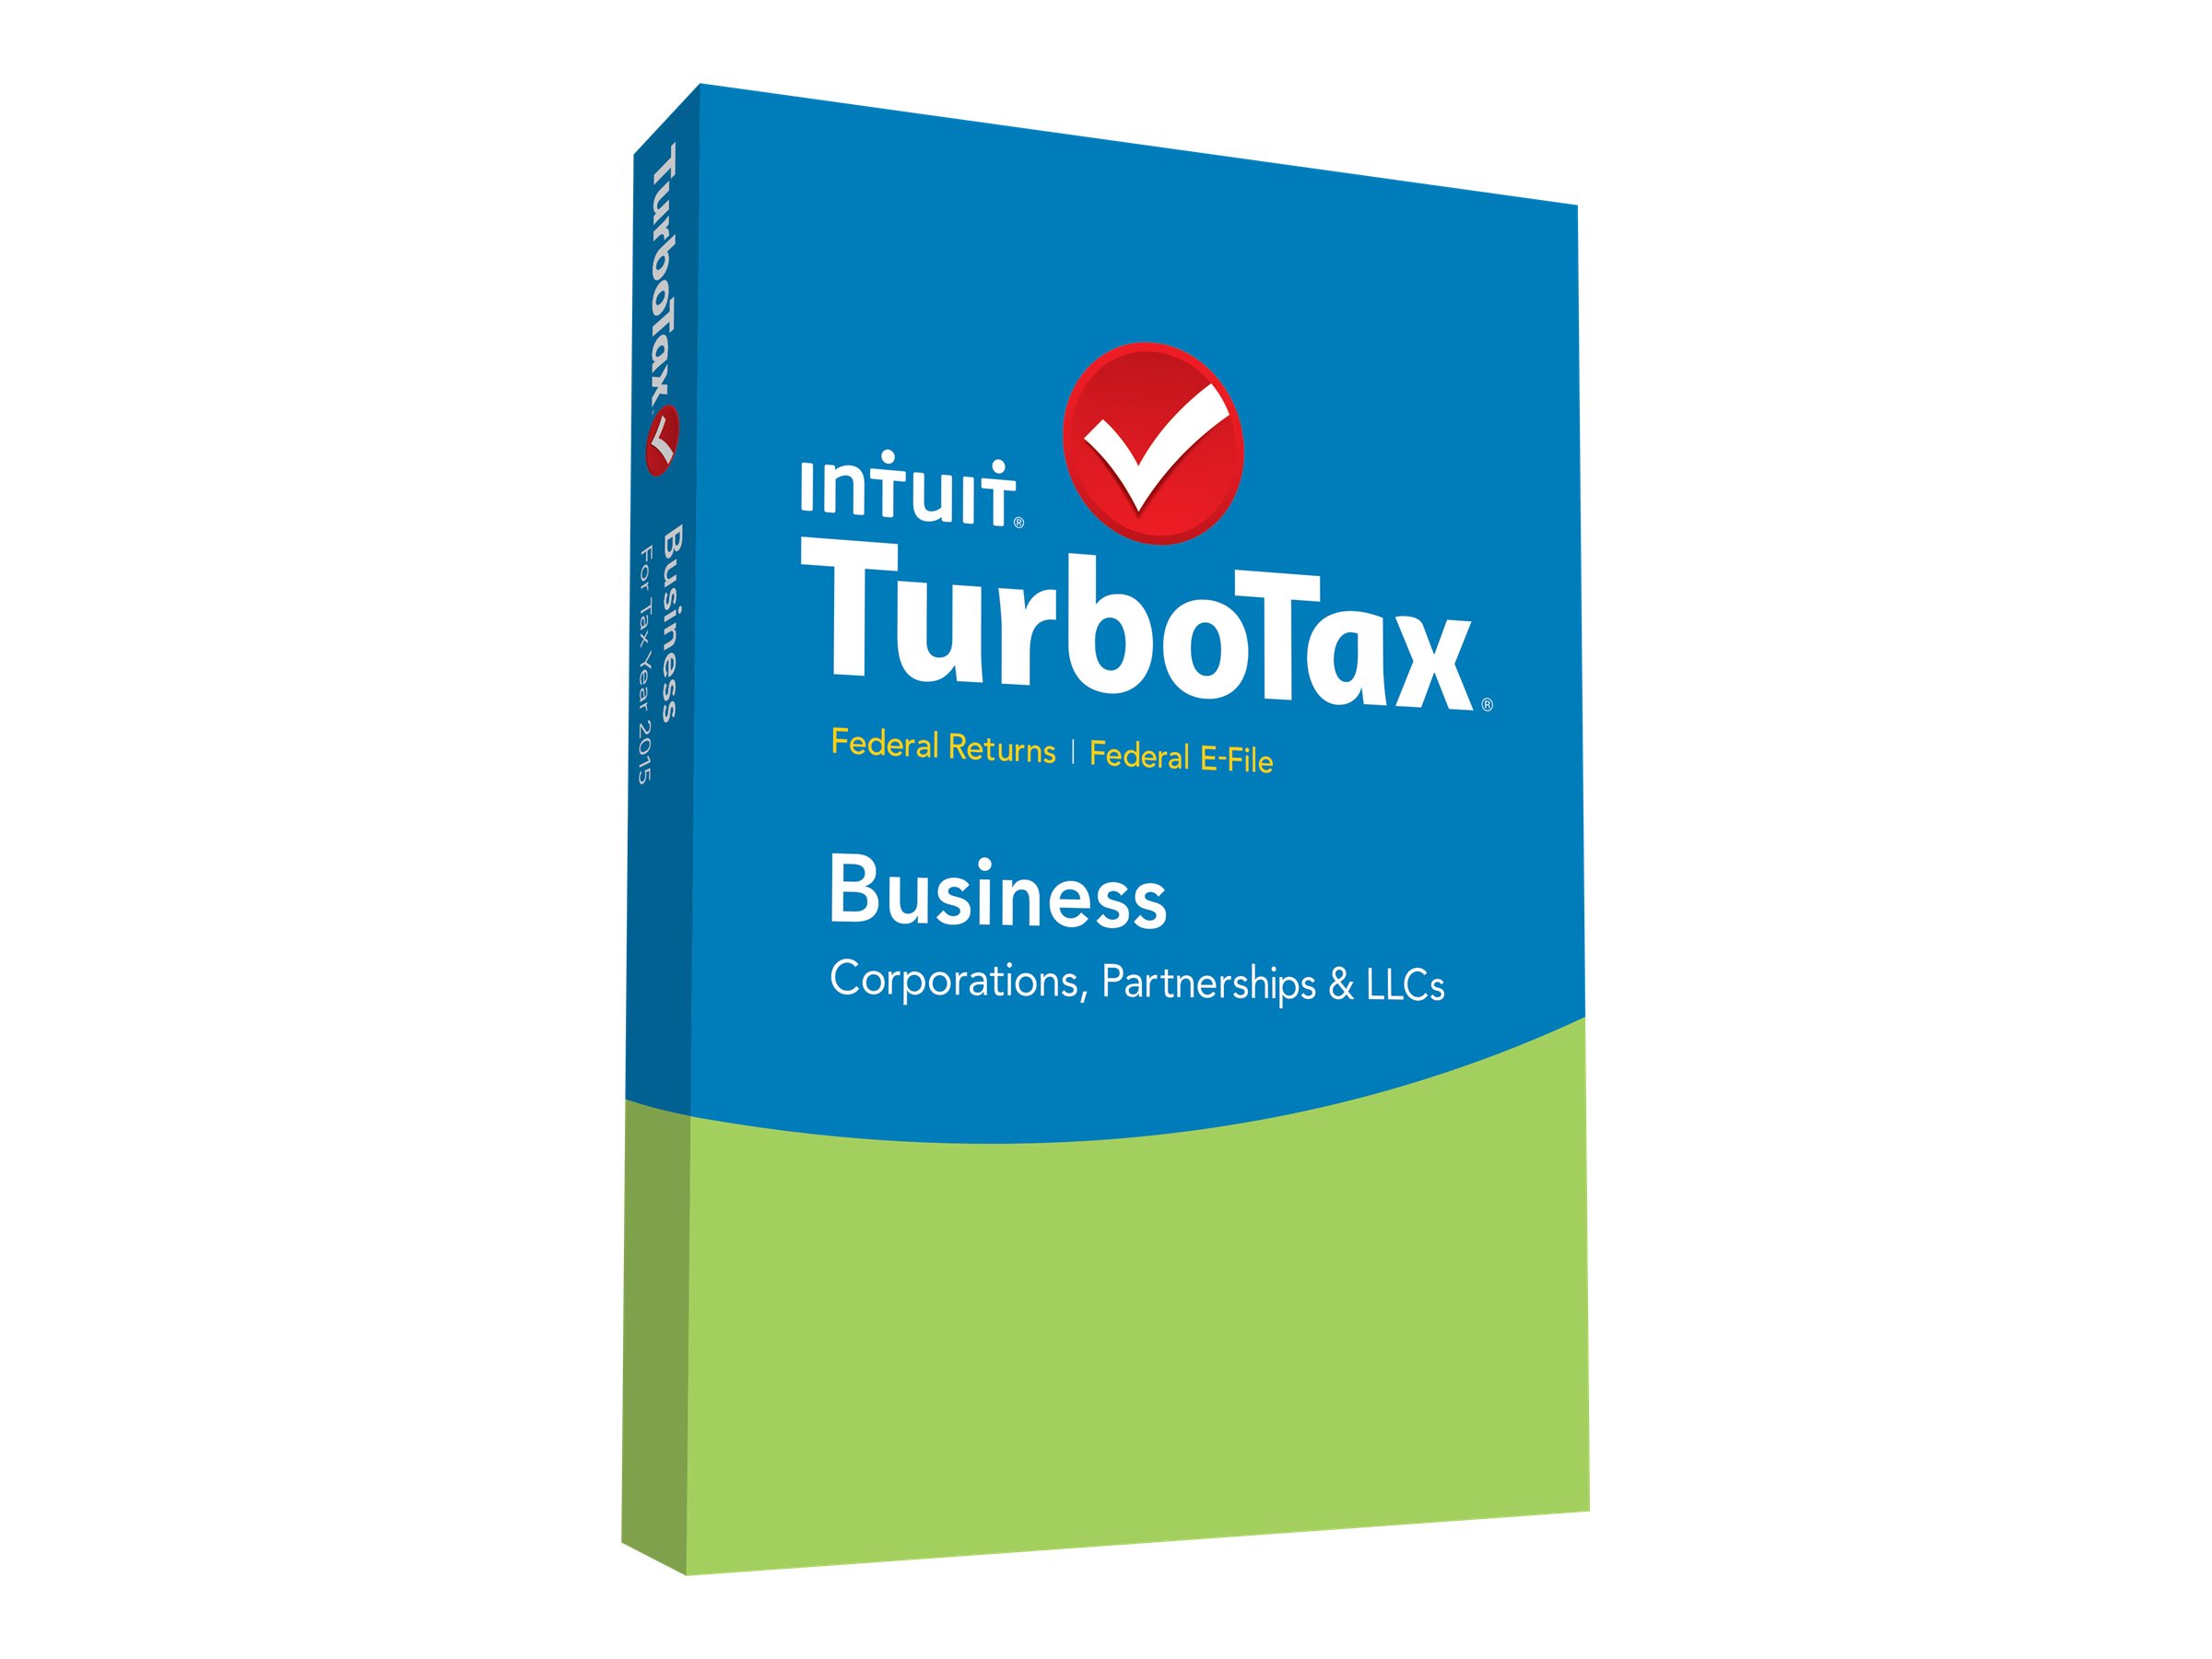 Intuit turbotax 2015 download